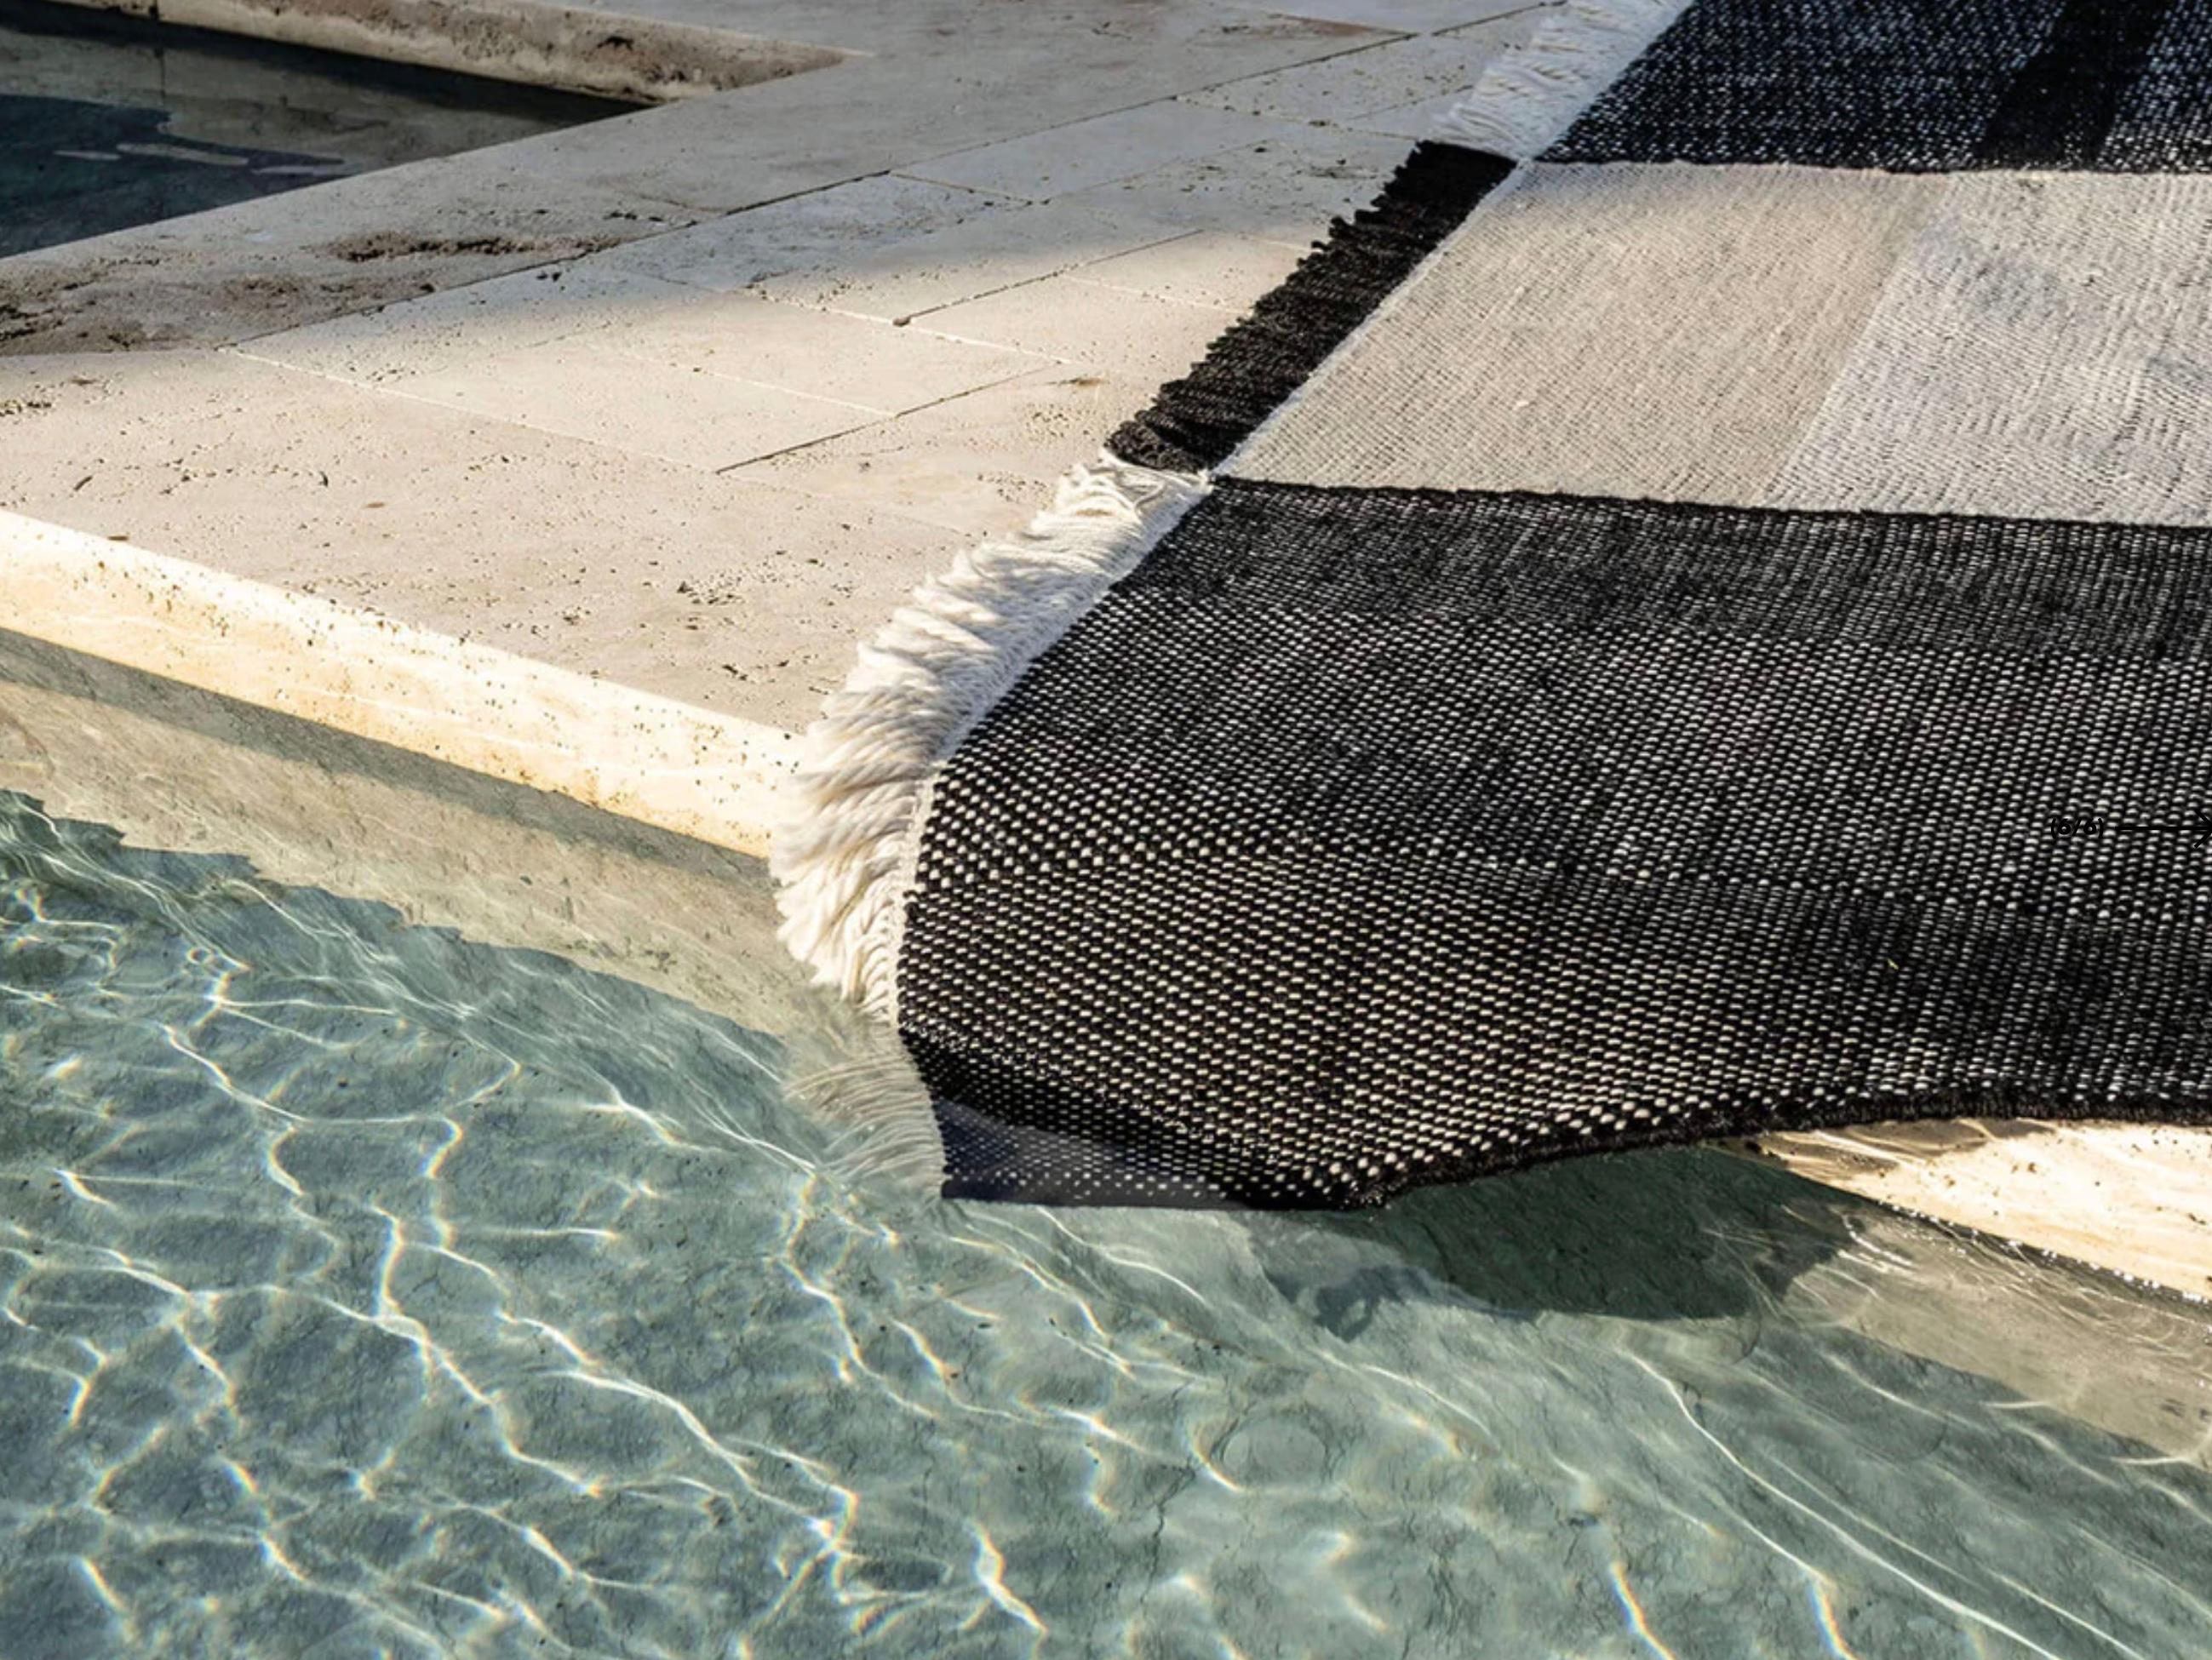 Nani Marquina & Elisa Padrón 'Tres' Outdoor Rug. Current production, Spain. Measures: 170x240cm

Tres Outdoor aims to transfer the warmth of the iconic Tres collection to the outdoor world. Made from 100% recycled PET, a material produced through